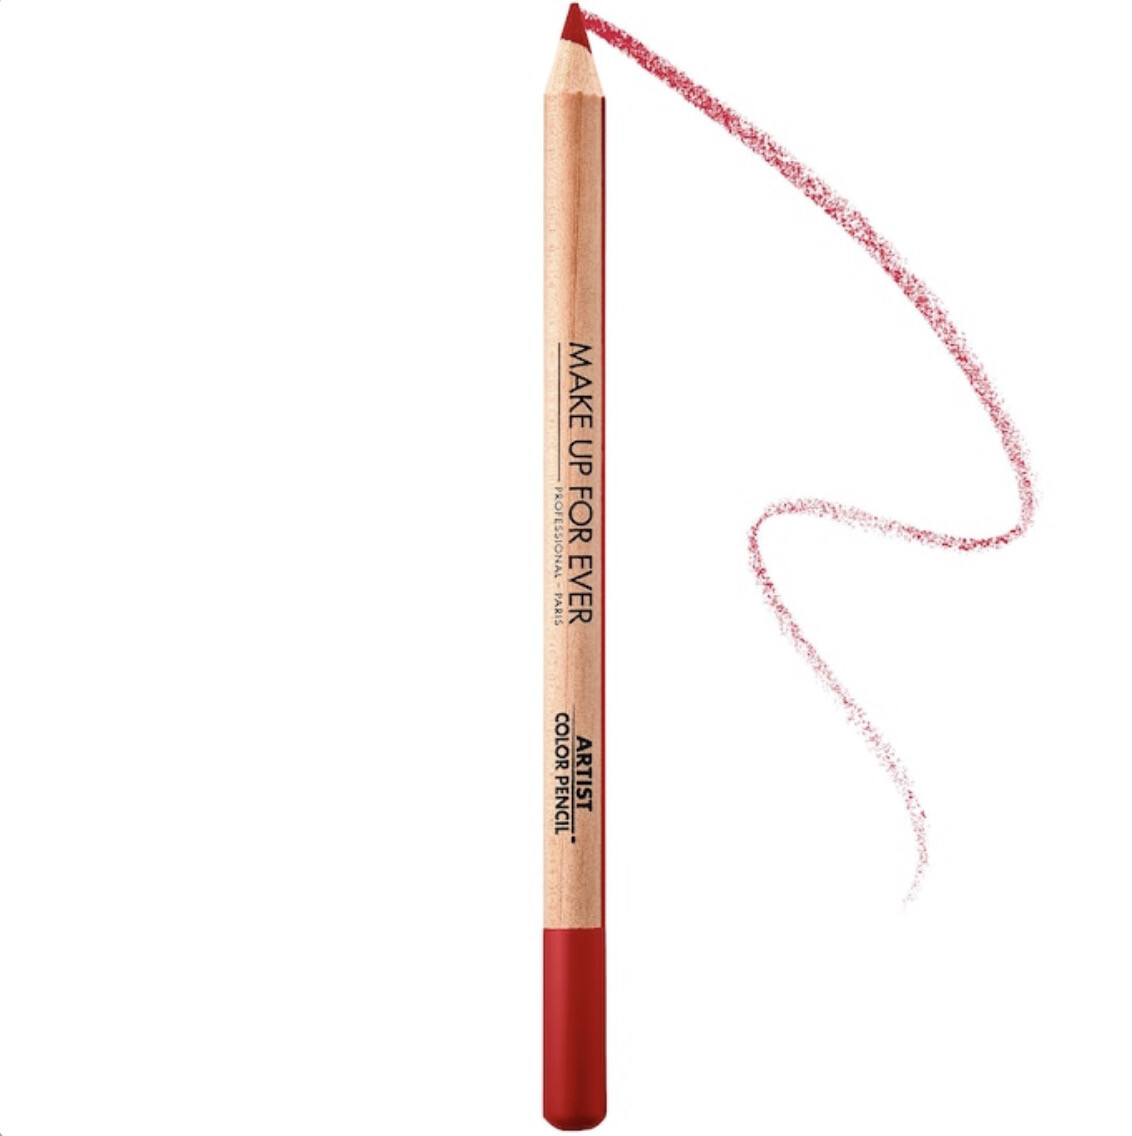 Make Up For Ever - Artist Color Pencil: Eye, Lip & Brow Pencil | 714 Full Red